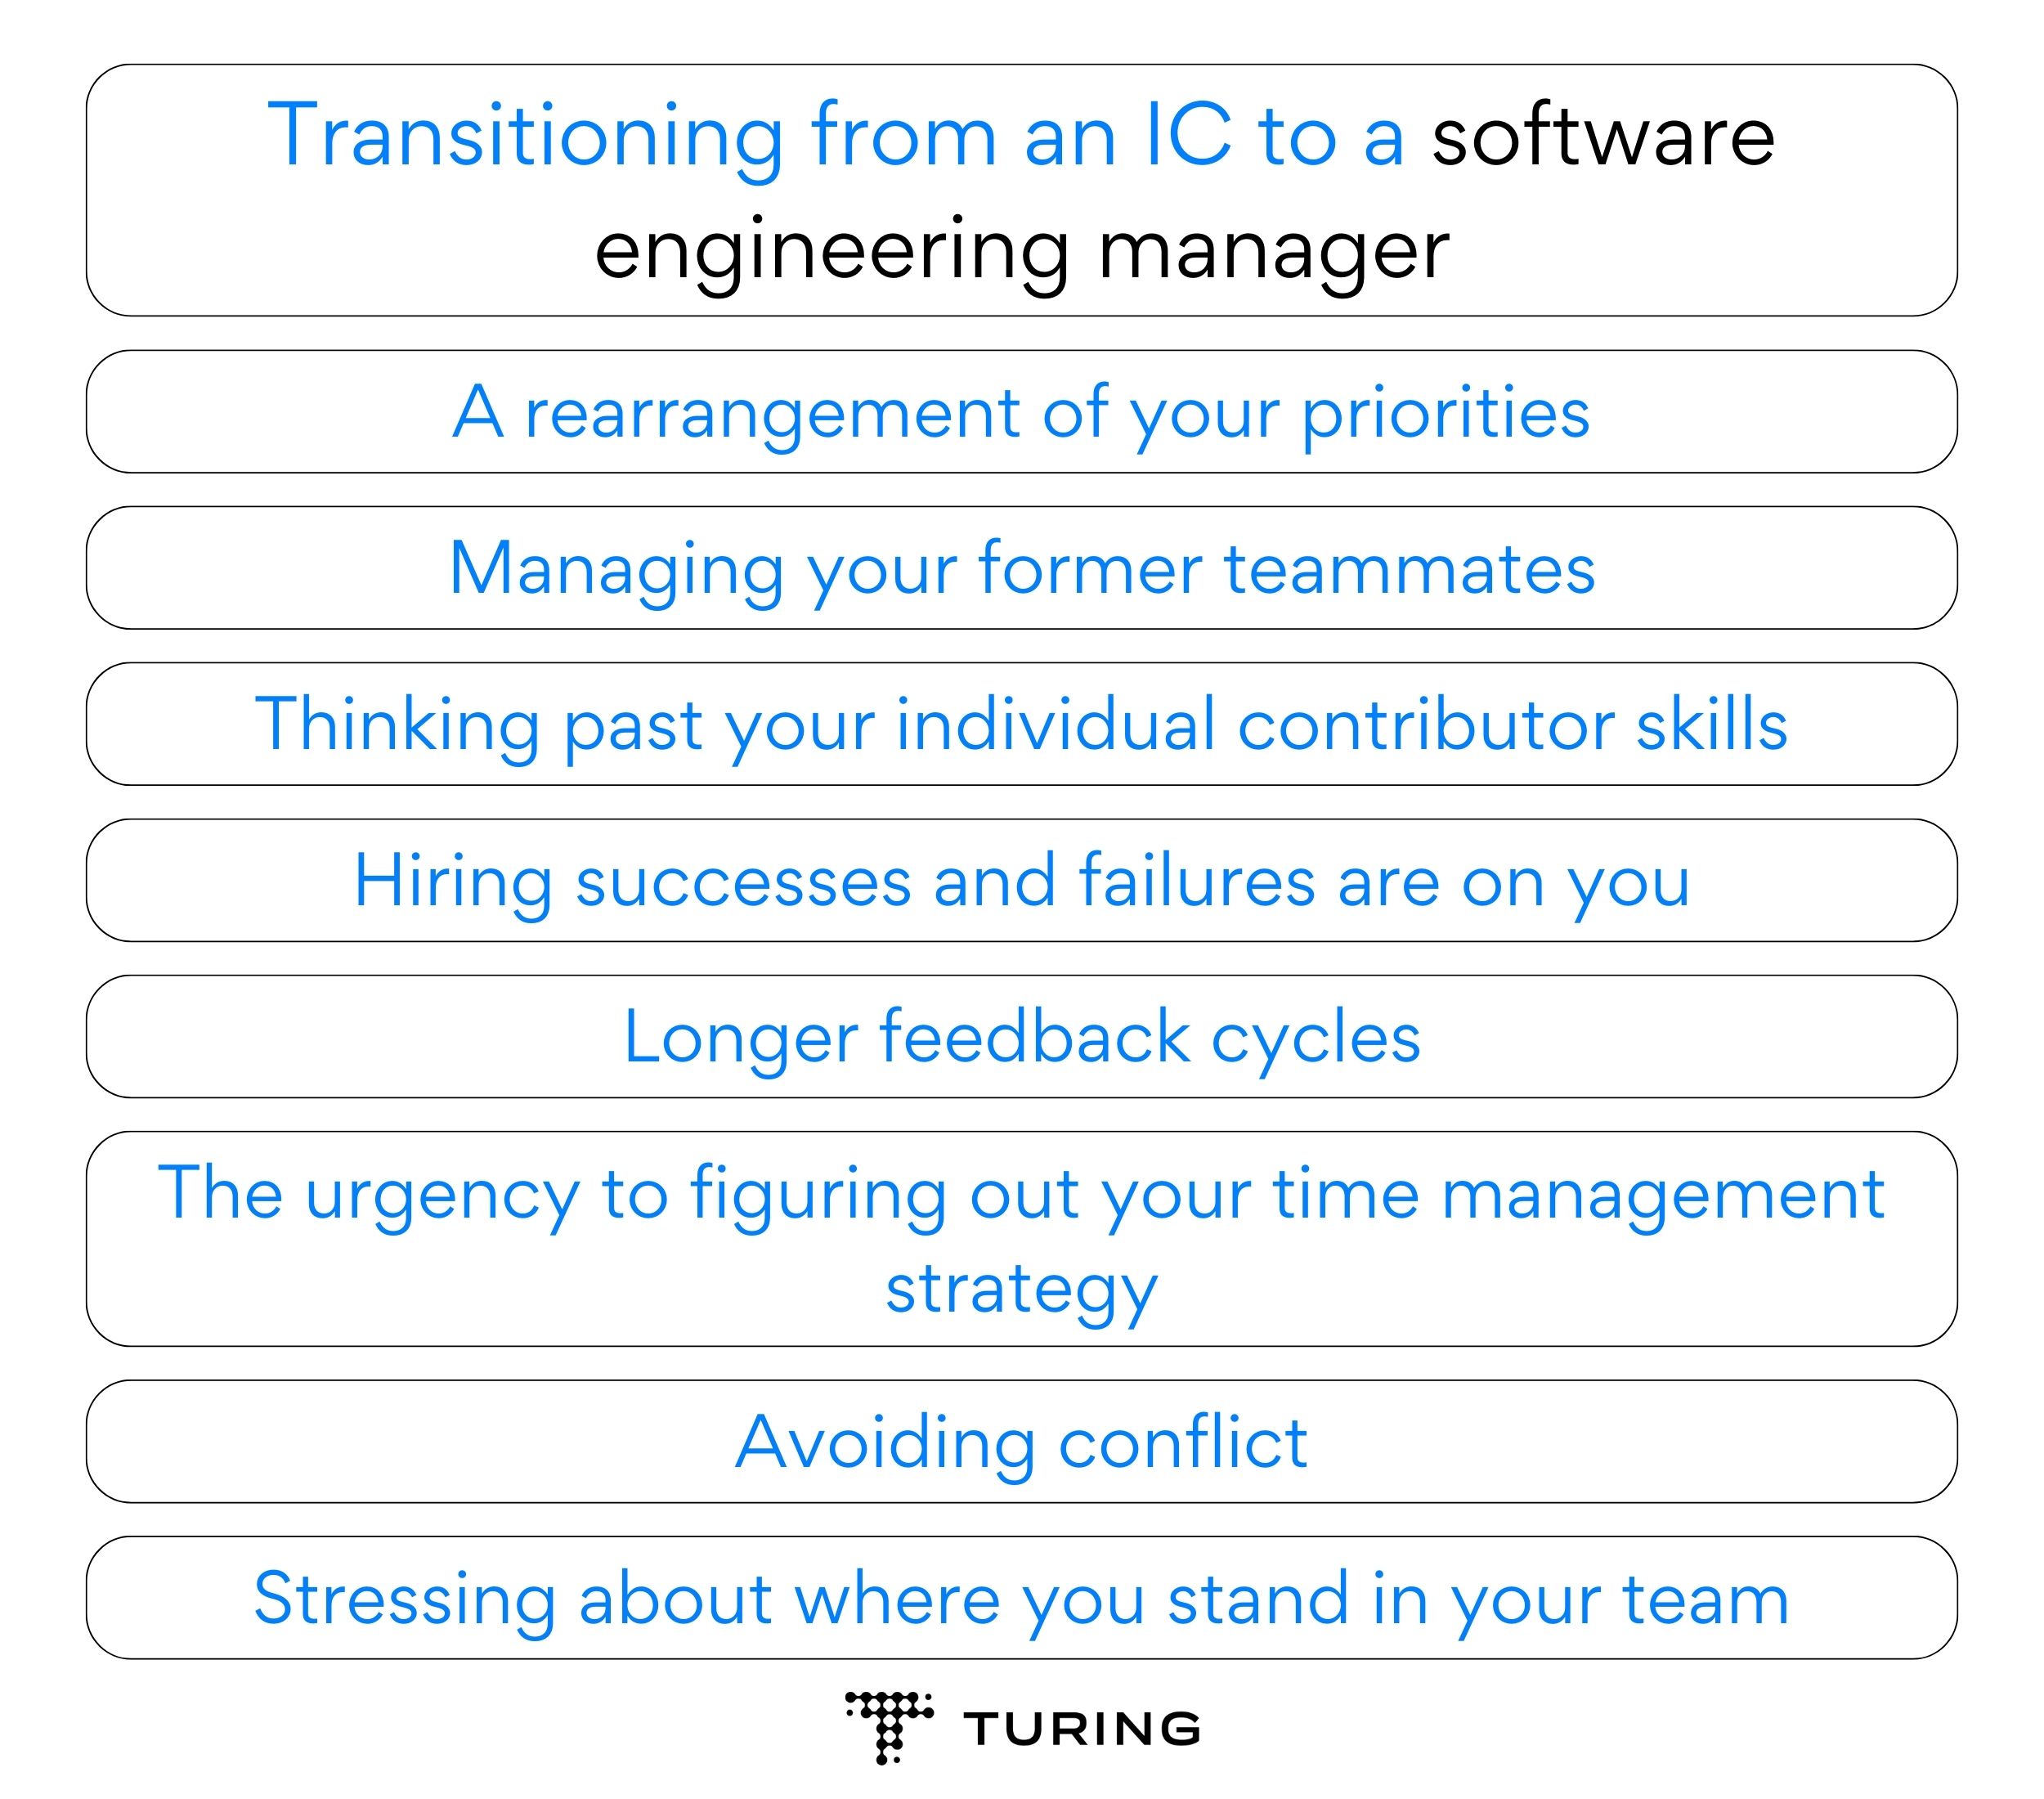 Transitioning from an IC to a software engineering manager